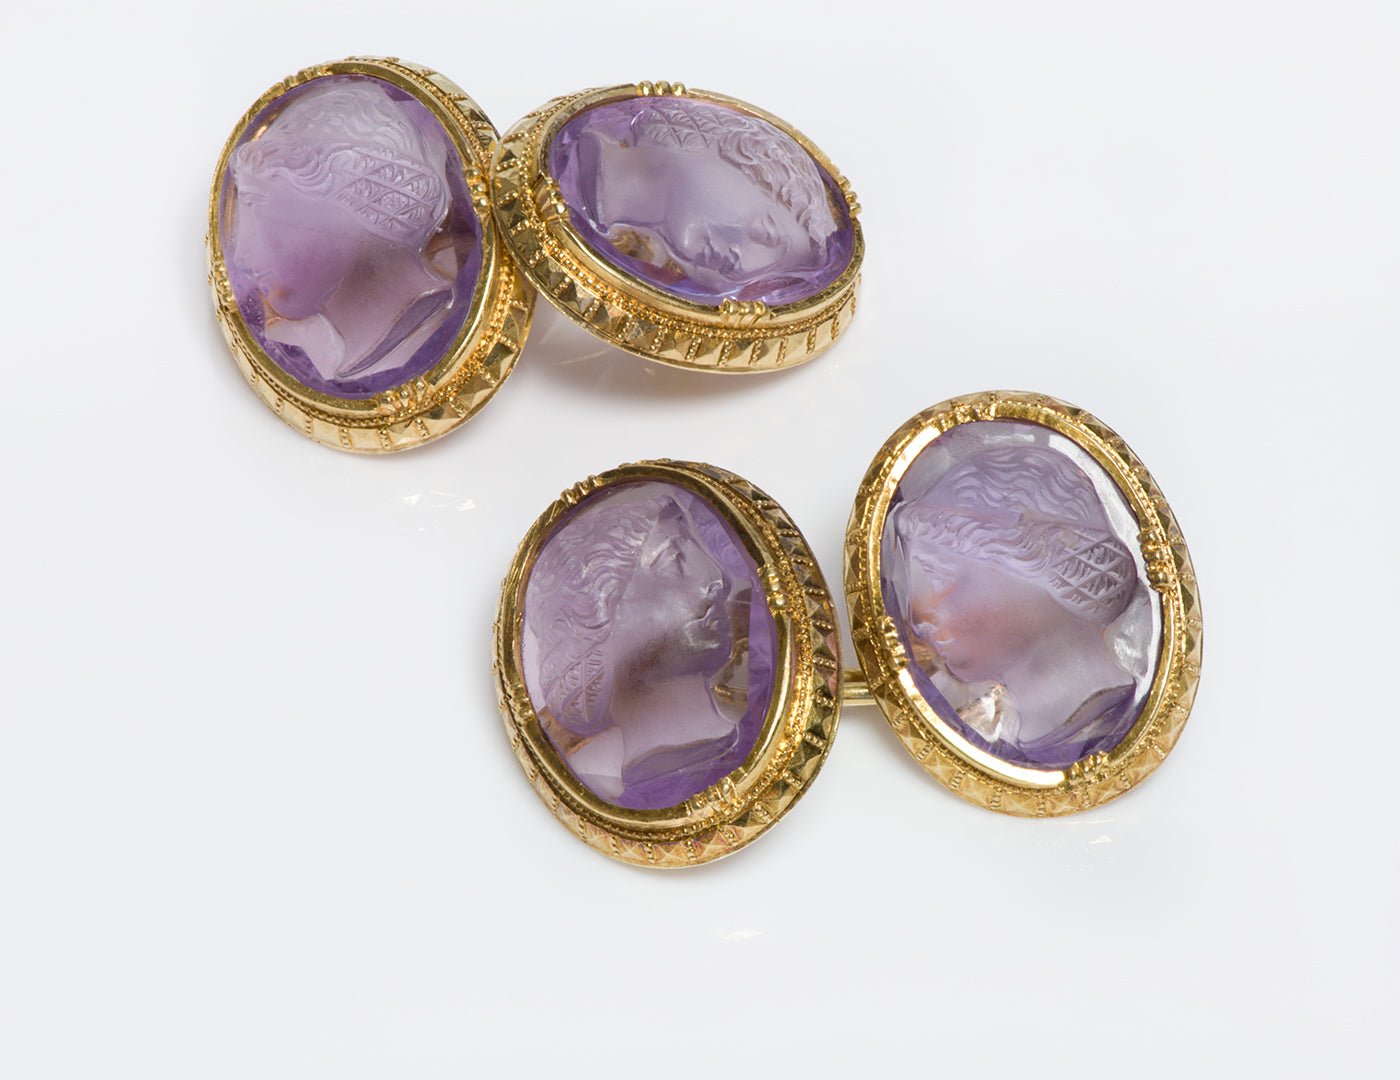 Antique Gold Amethyst Cameo Cufflinks - DSF Antique Jewelry